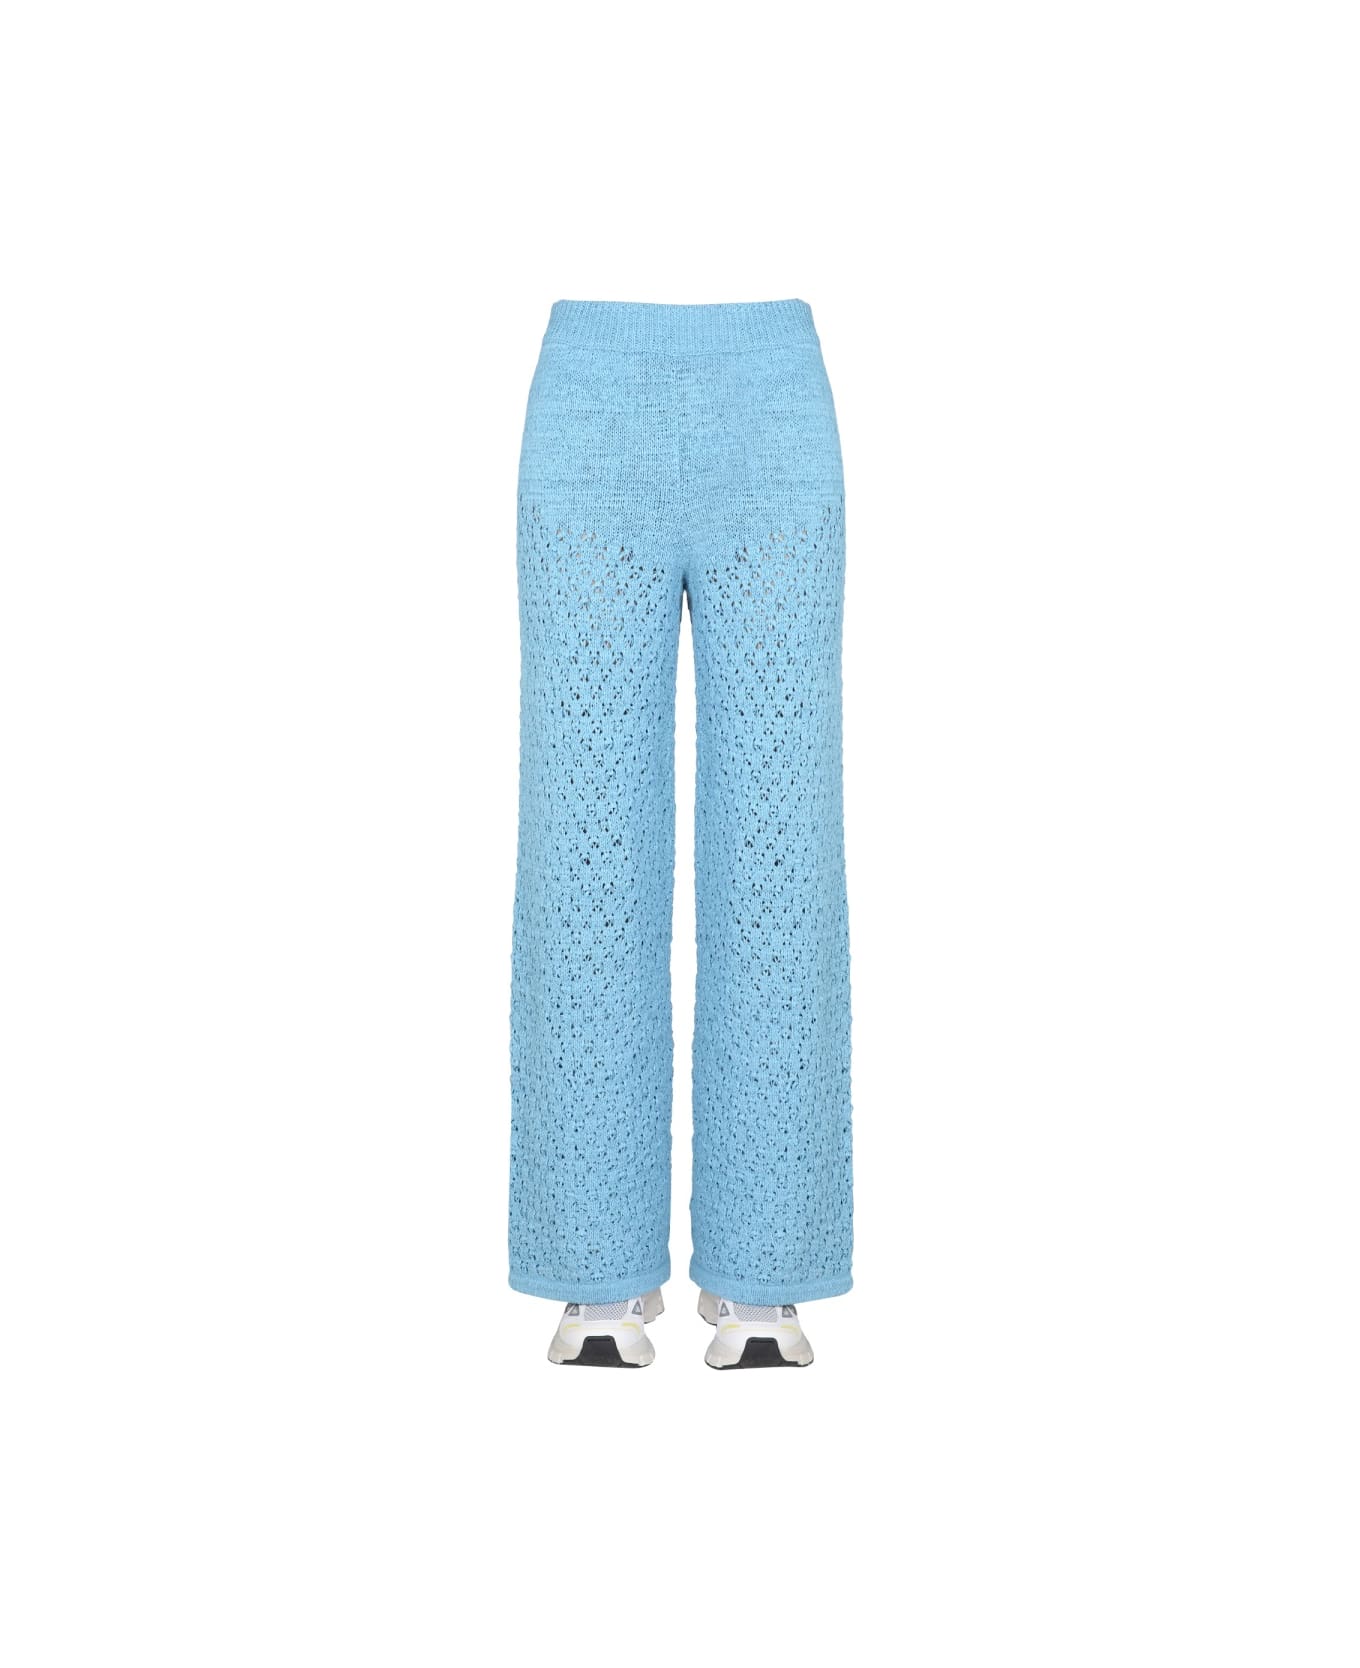 Rotate by Birger Christensen "calla" Trousers - BABY BLUE ボトムス